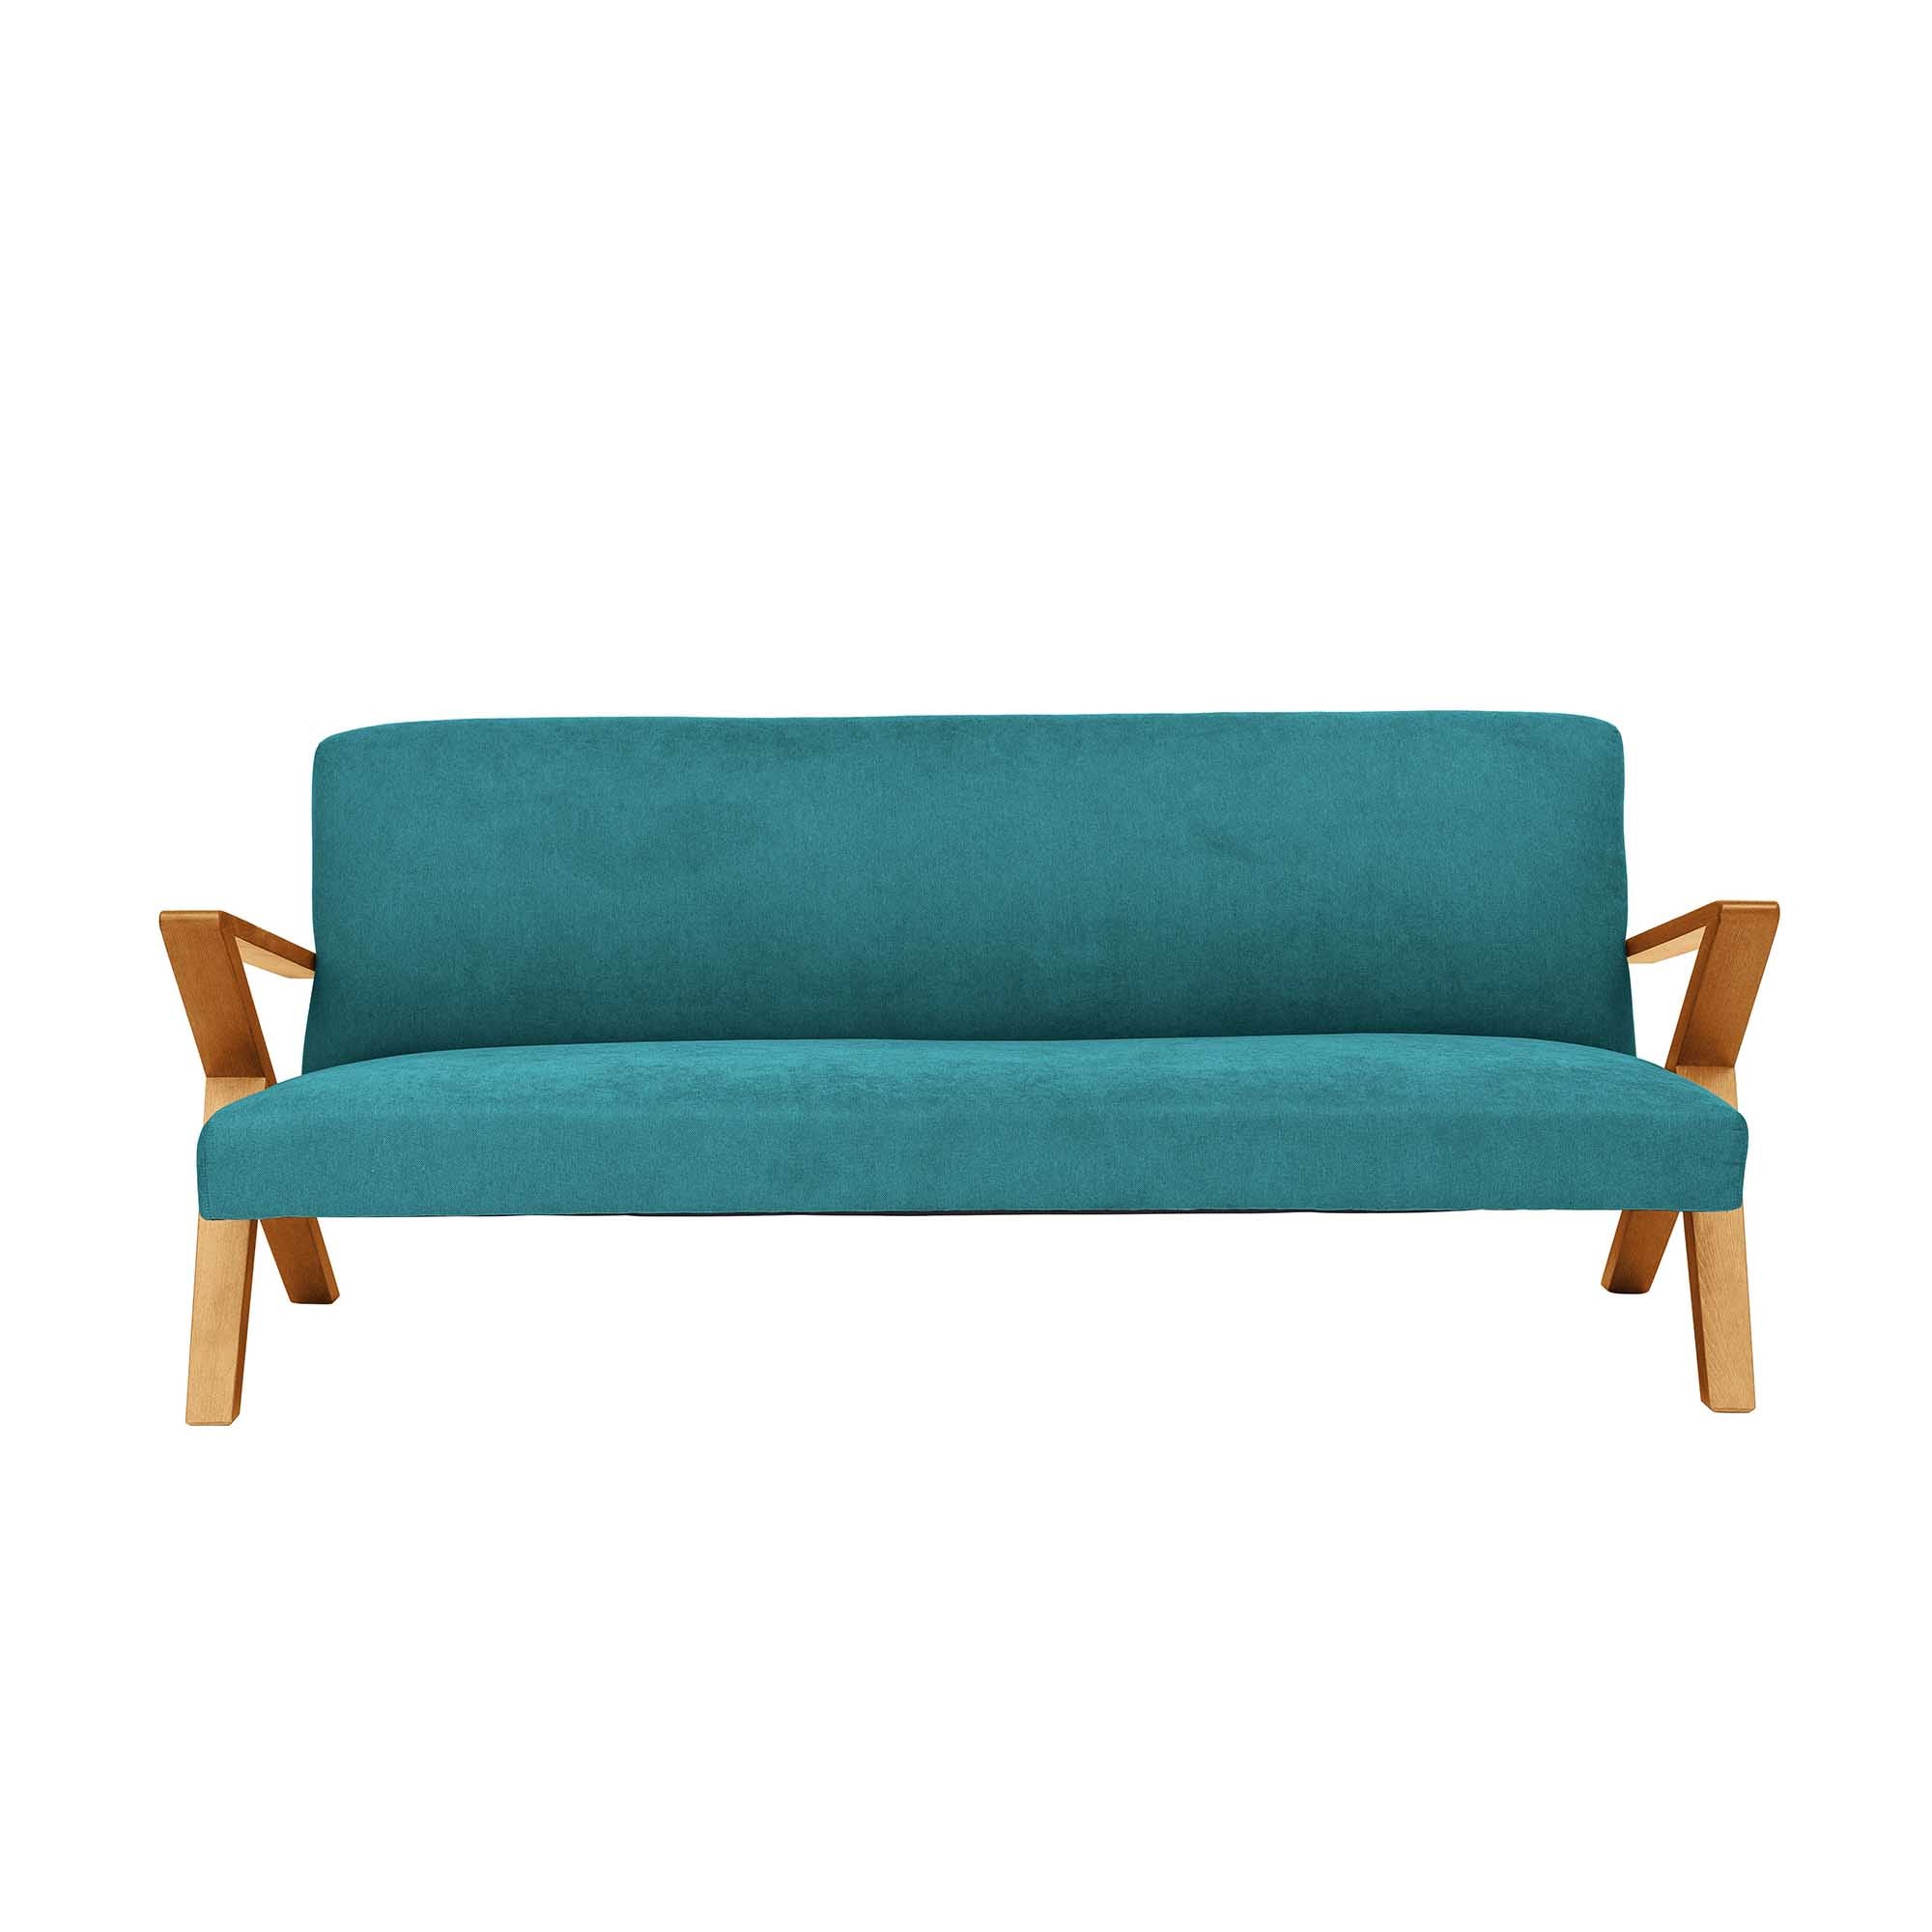 4-seater Sofa Beech Wood Frame, Oak Colour blue fabric, front view